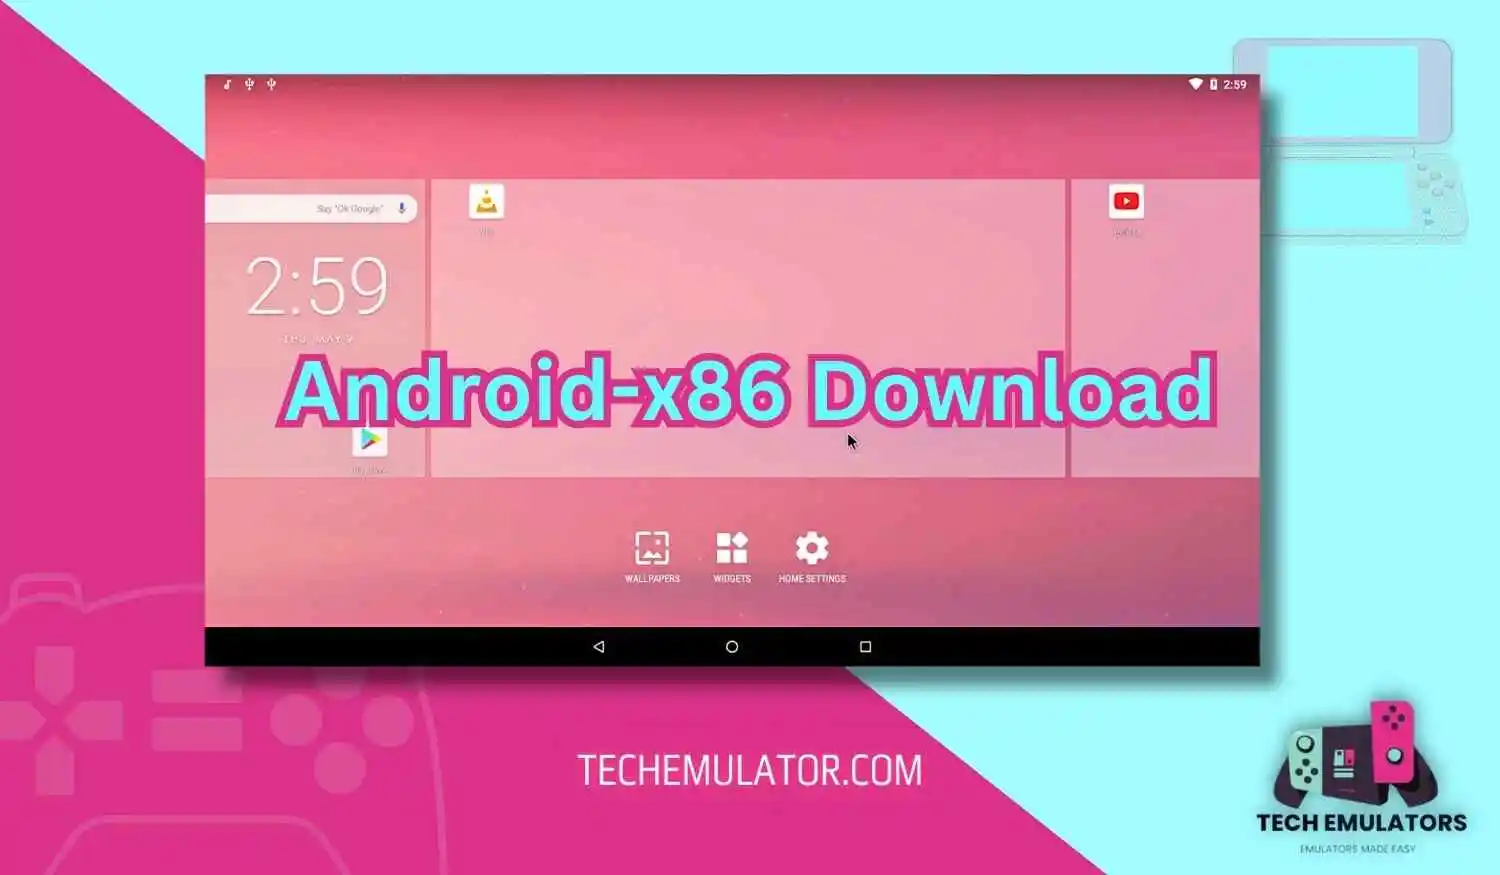 Android-x86 Download for Windows 11, 10, 8 - 2023